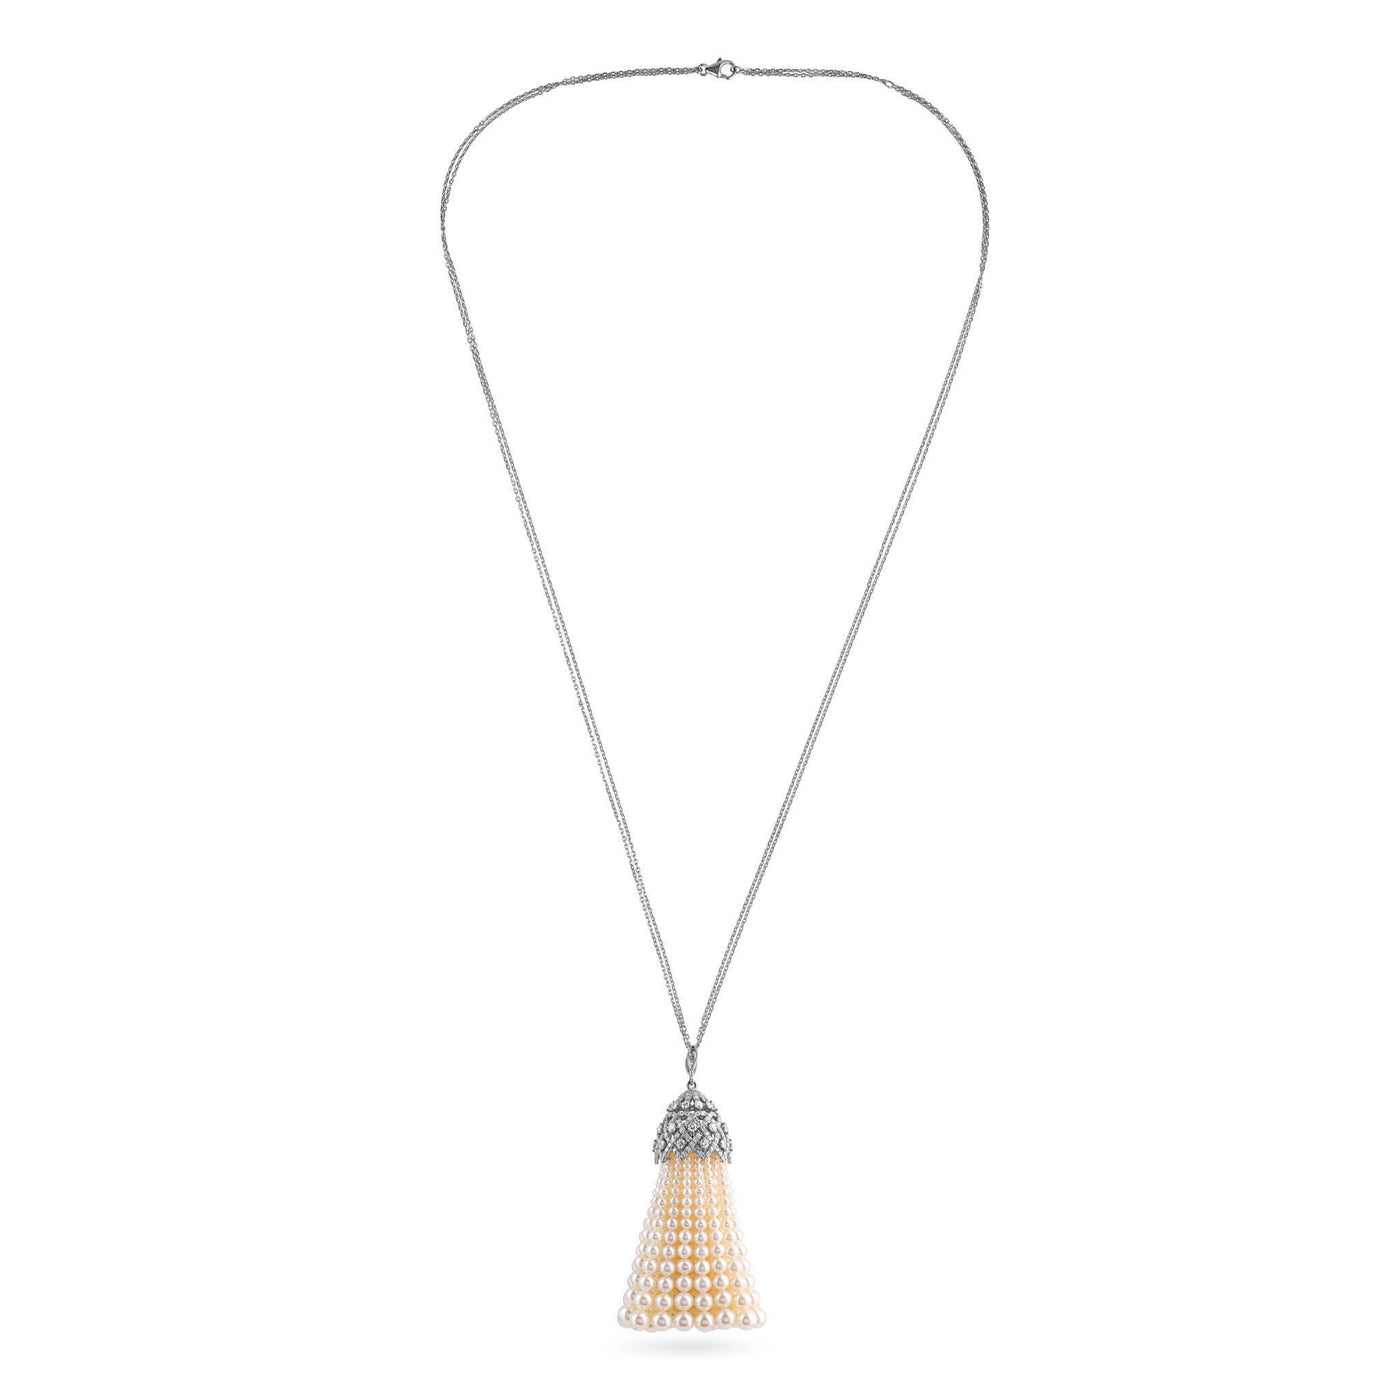 BAHR White Gold Diamond Pendant with Pearls